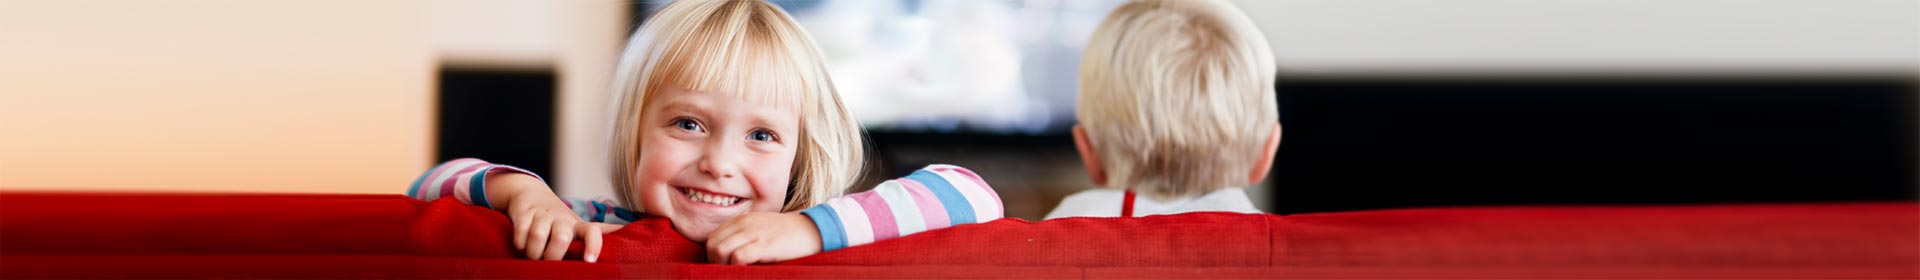 Girl-looking-back-at-you-while-brother-watches-tv-GettyImages-157592182